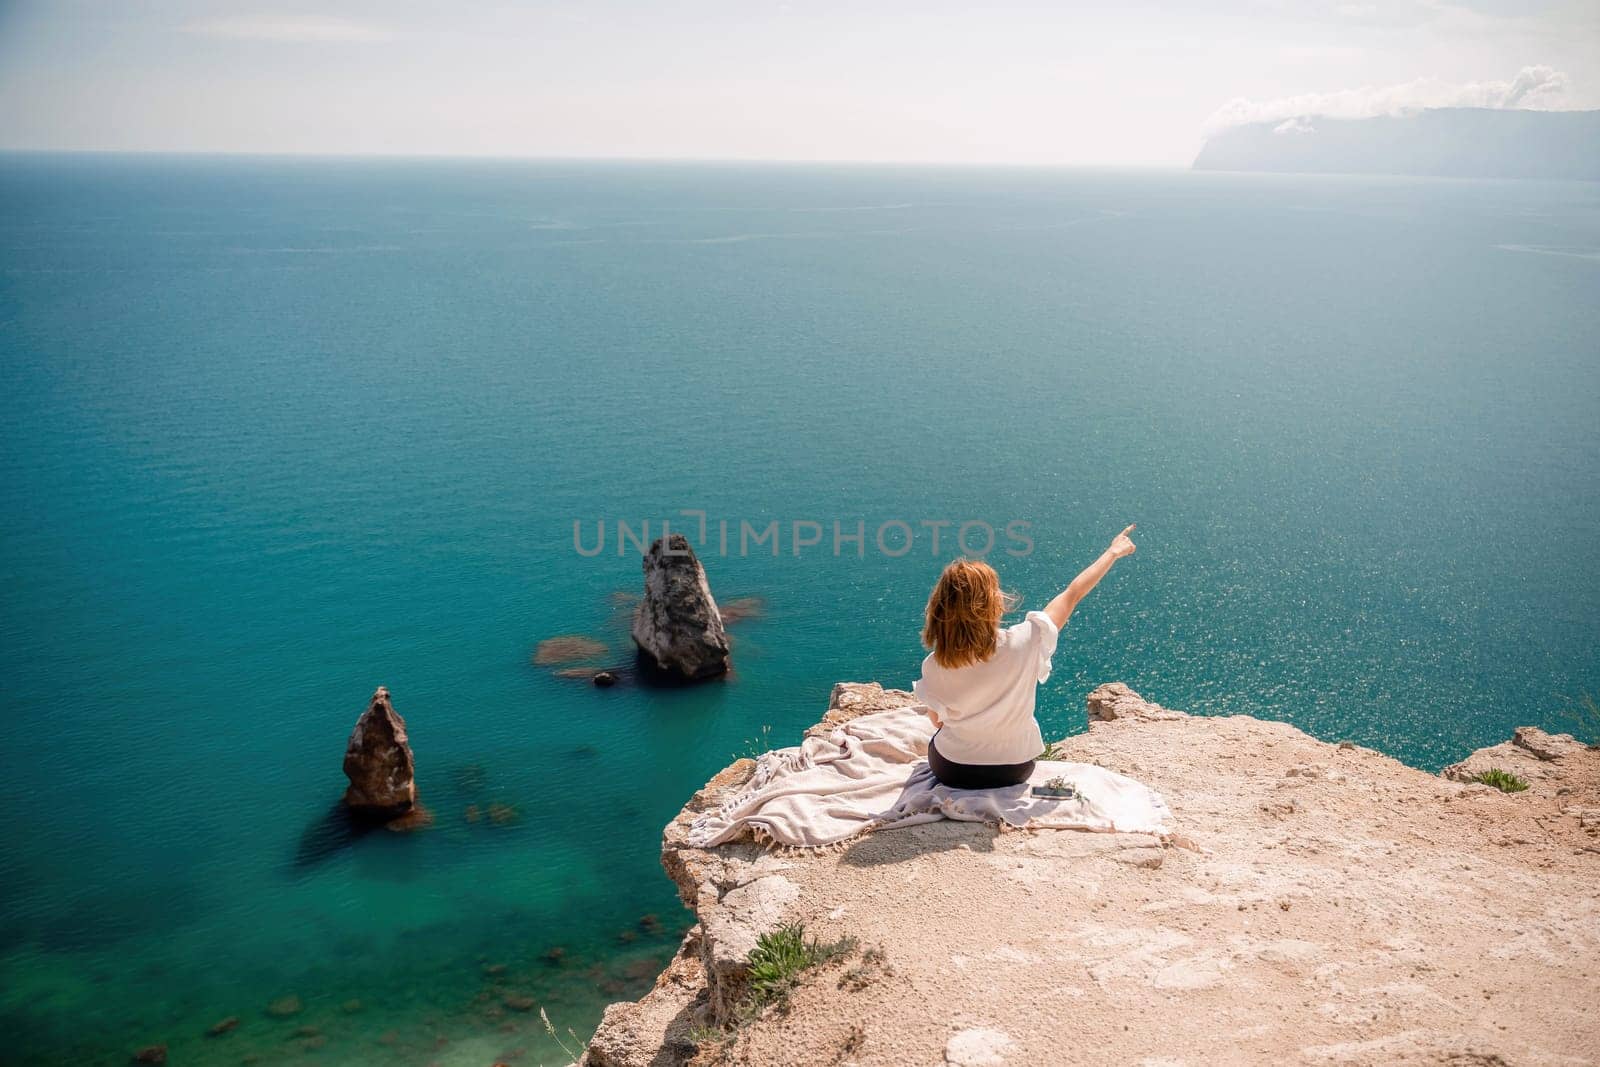 A woman is sitting on a rock overlooking the ocean. She is pointing to the water. The scene is peaceful and serene, with the woman enjoying the view and the calming sound of the waves